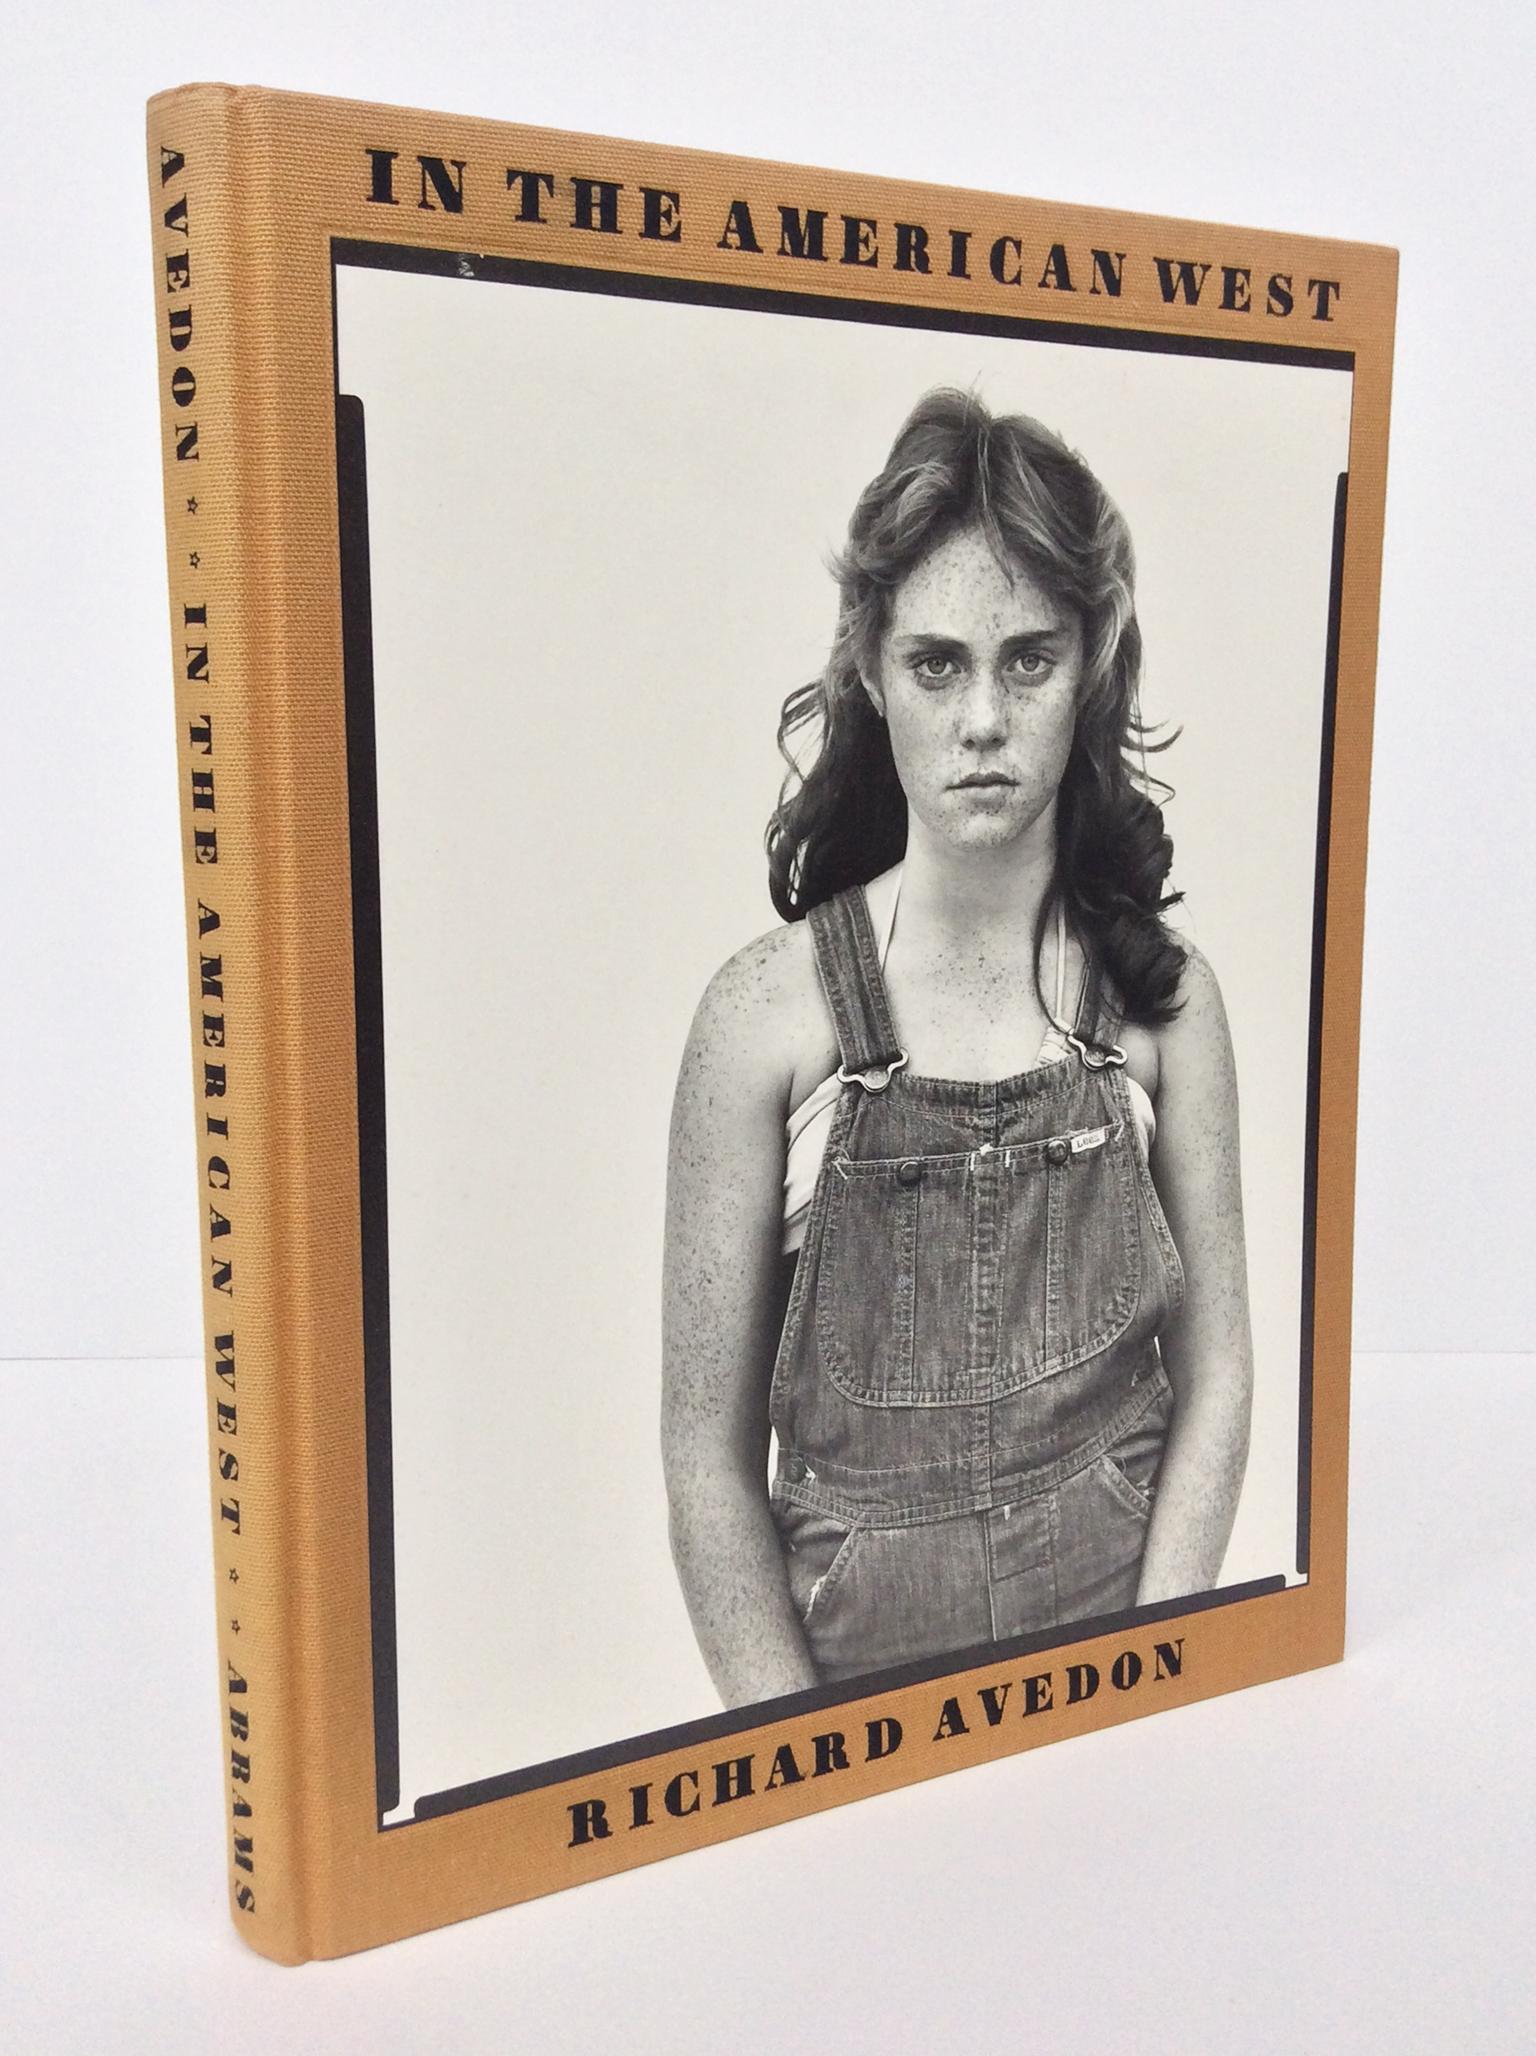 richard avedon in the american west book